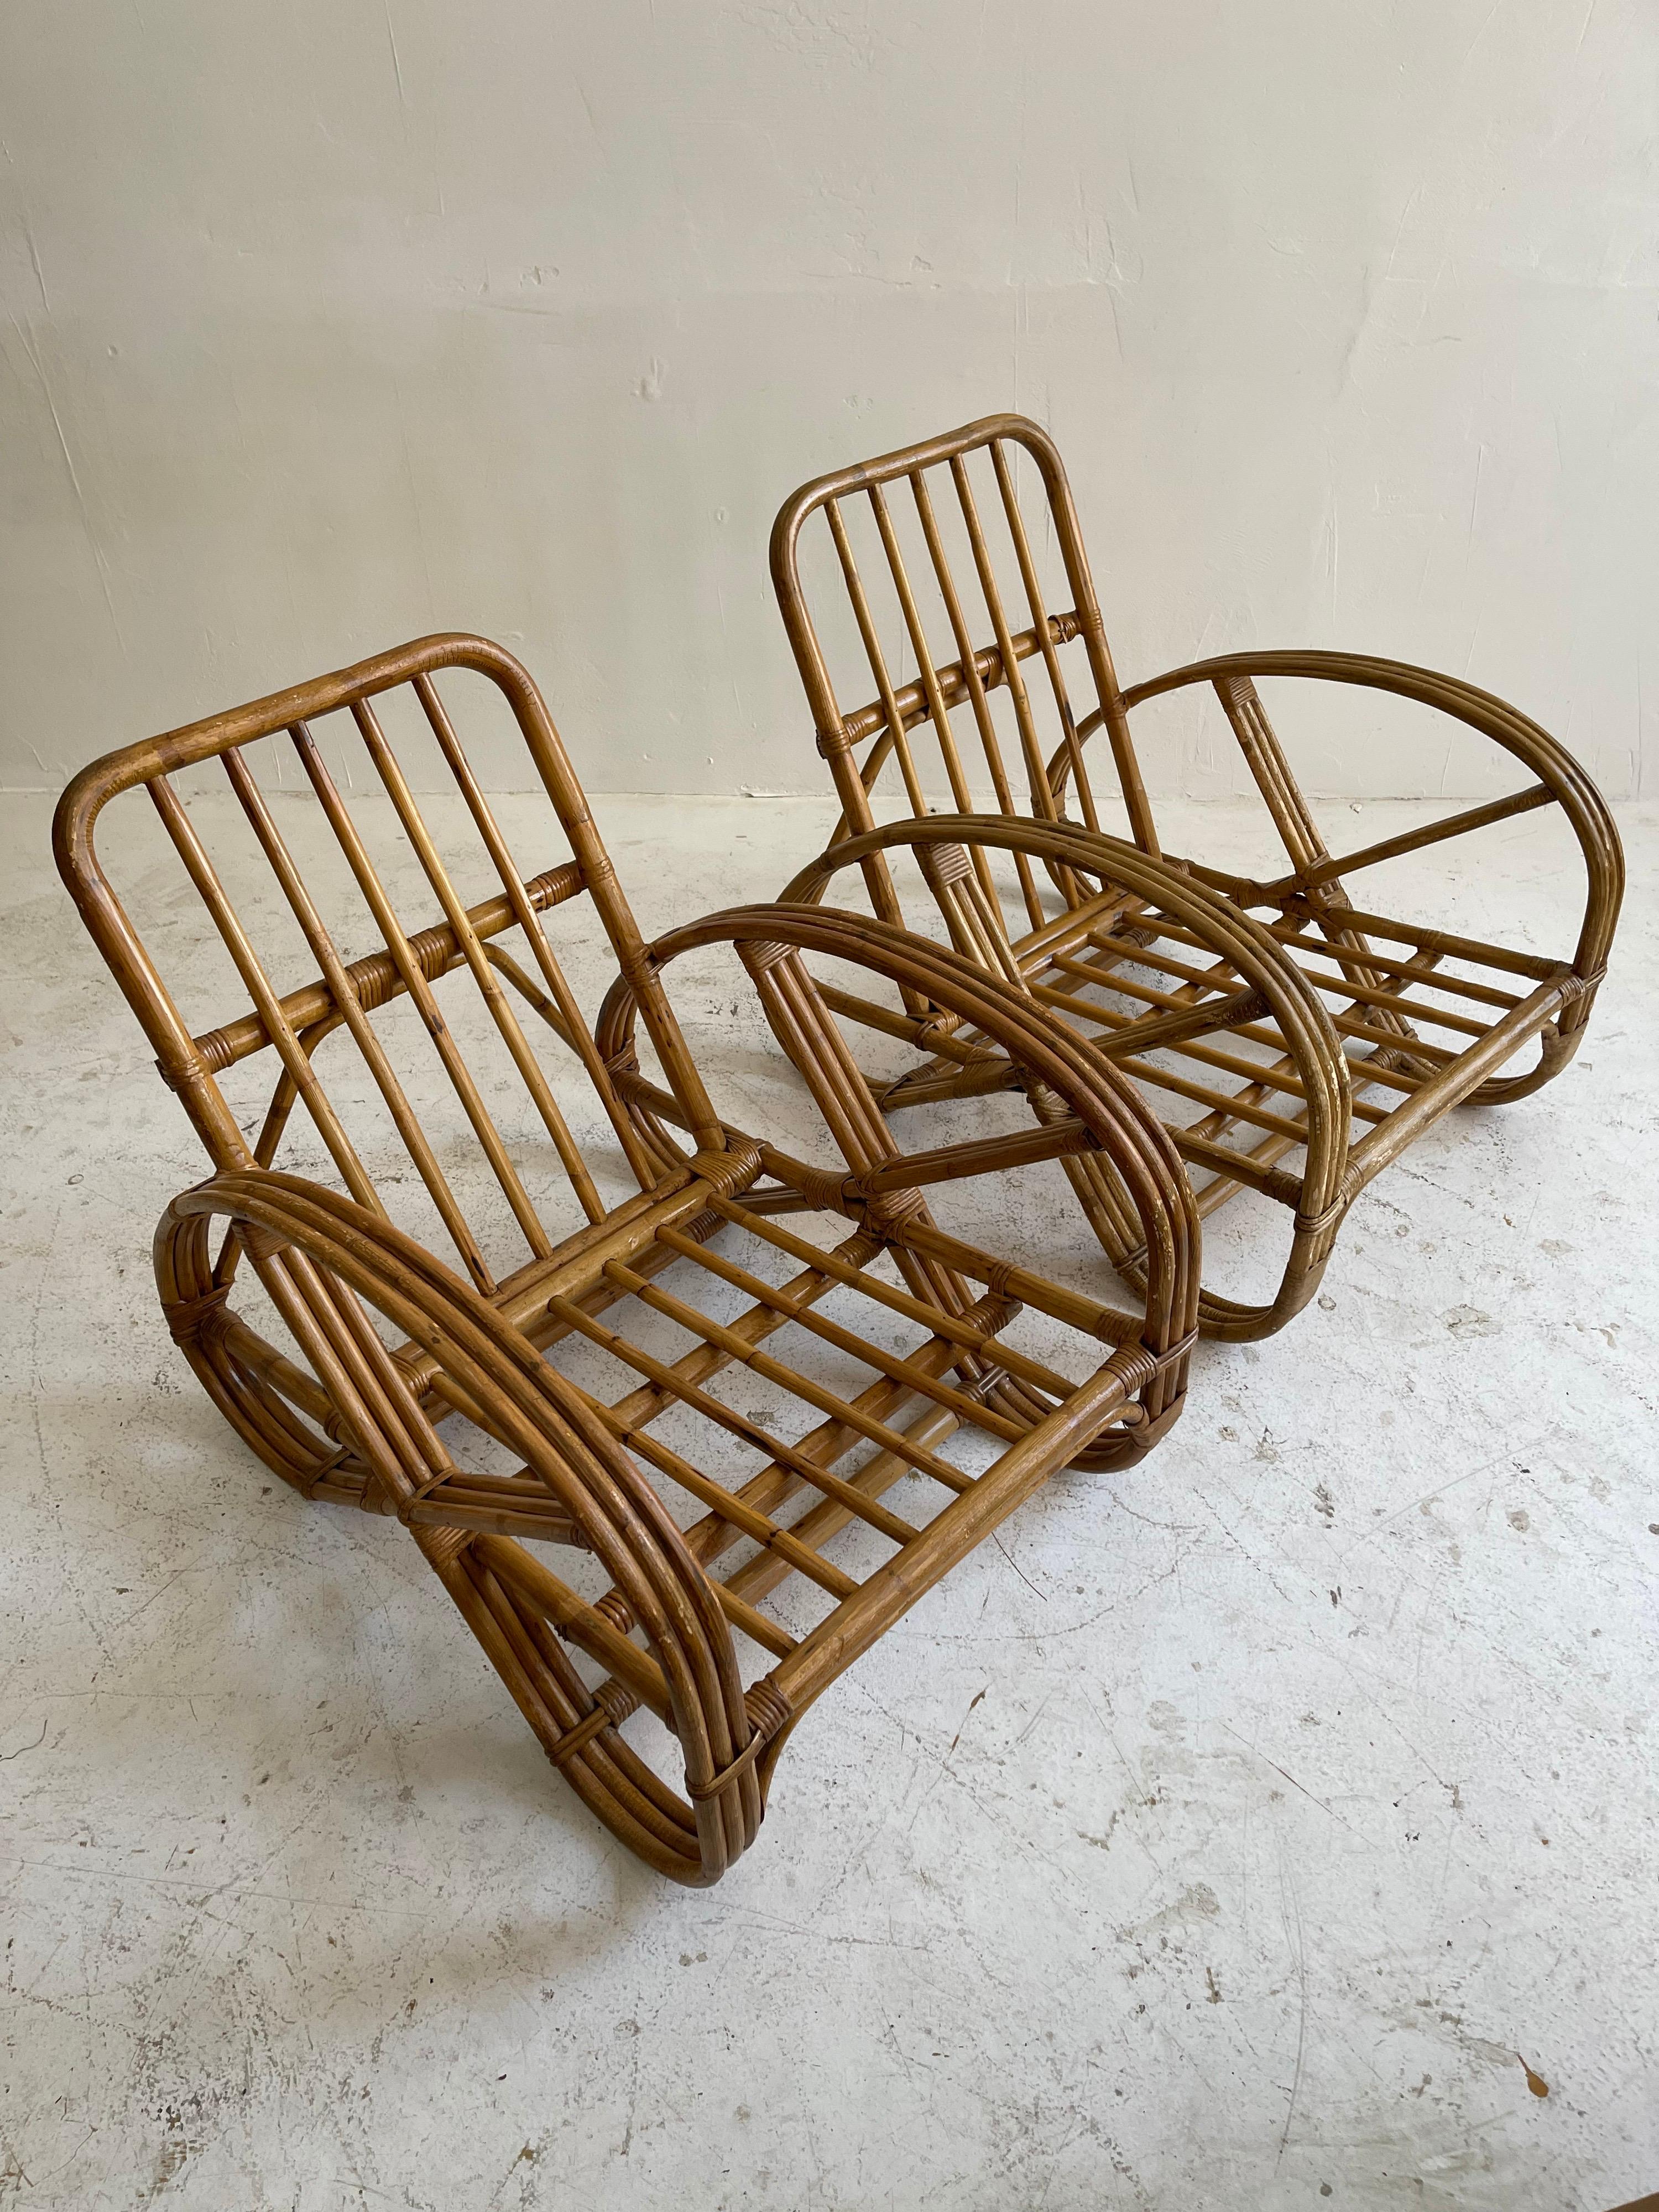 Bamboo Rattan Pretzel Living Room Suite Sofa Chairs Table, France 1955 For Sale 3